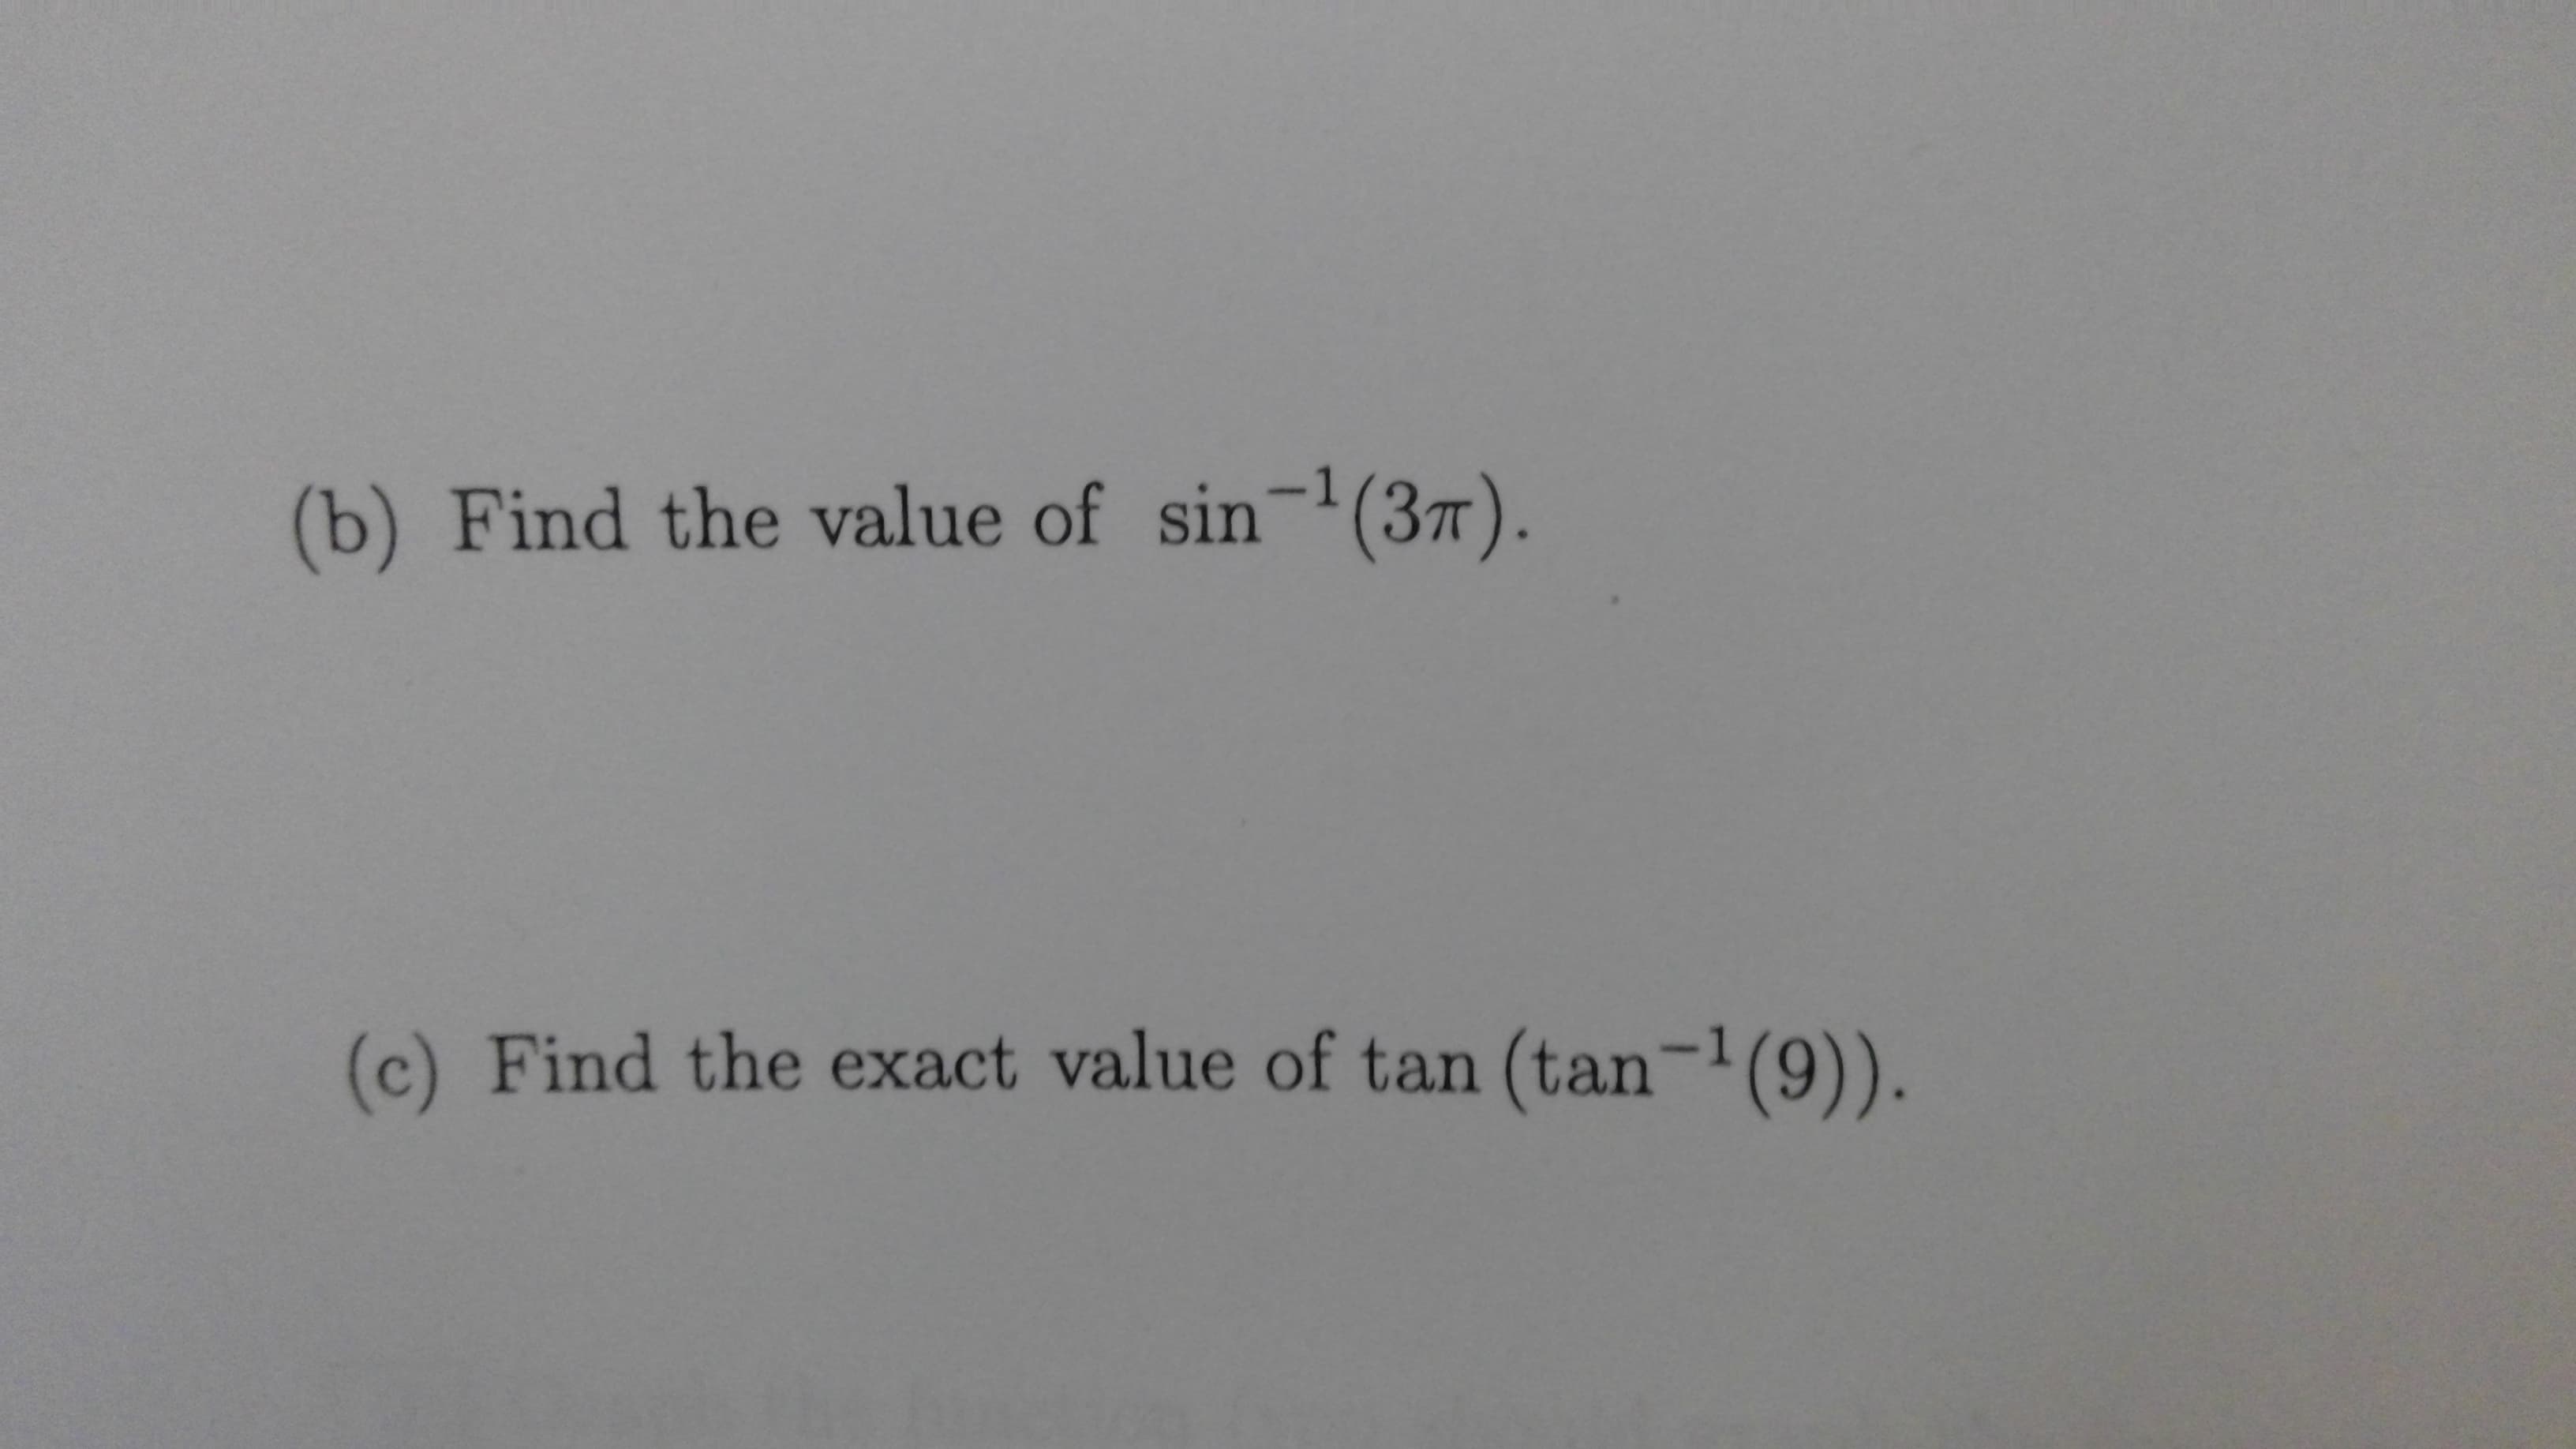 (b) Find the value of sin-(37).
(c) Find the exact value of tan (tan-(9)).
